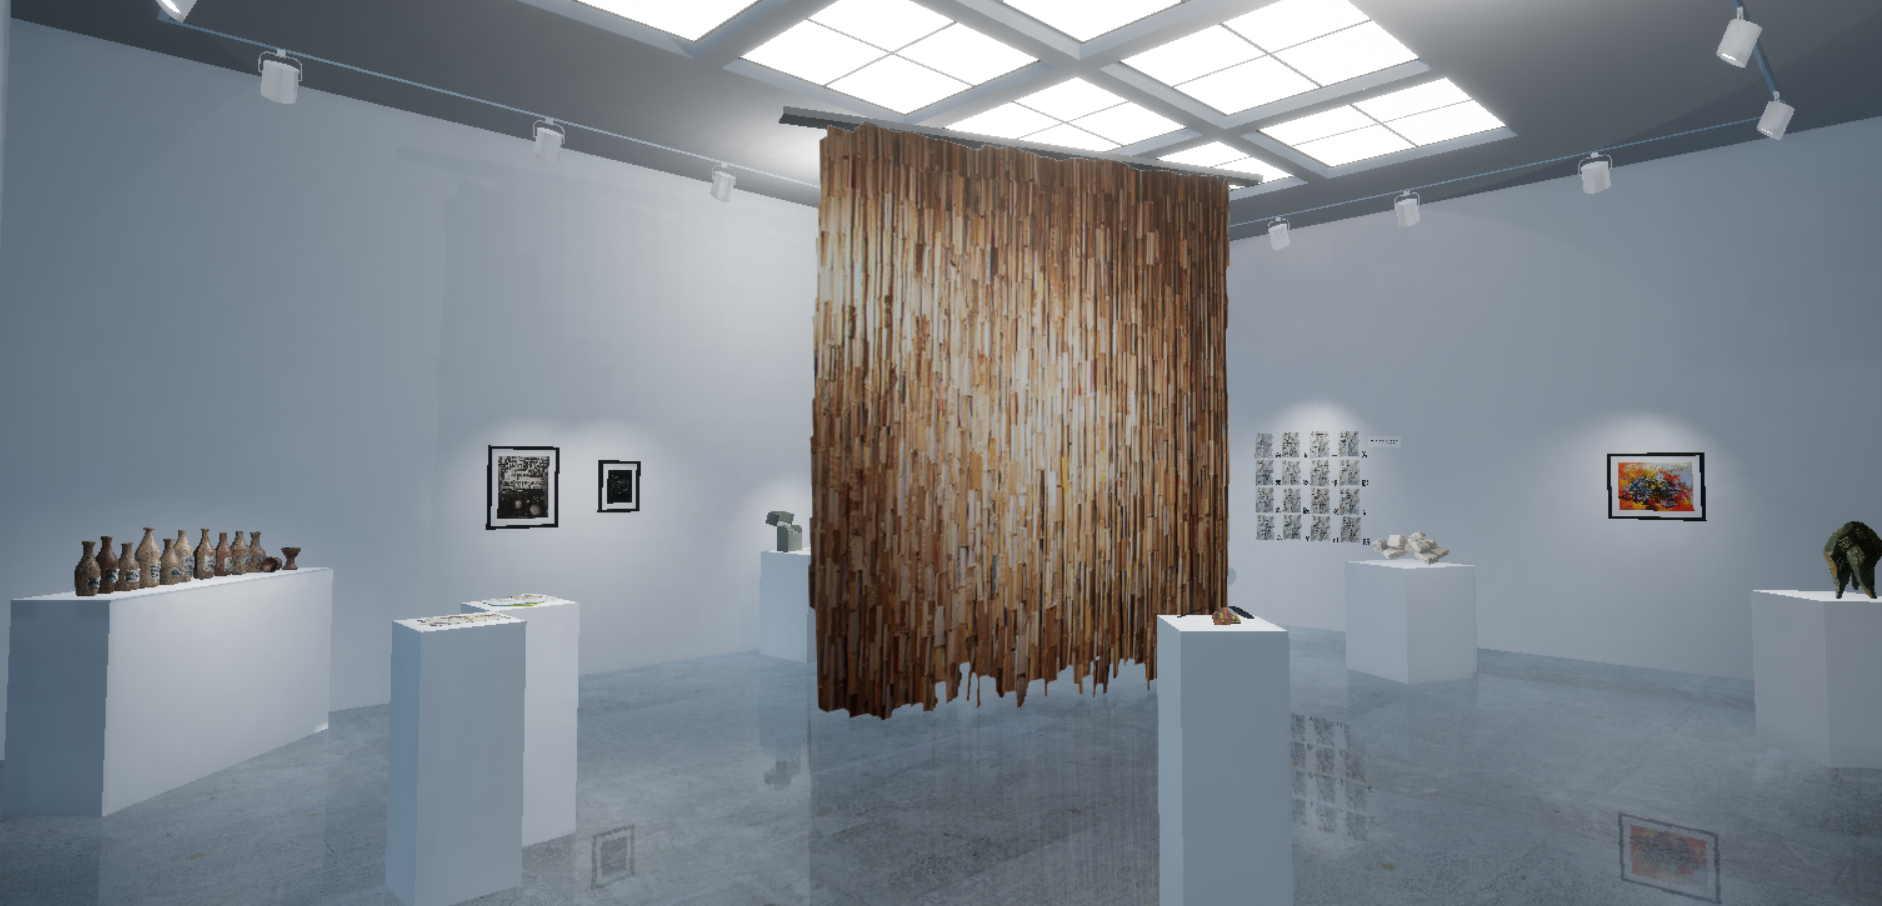 Installation View, Front East Gallery, "Ink & Clay 45" Virtual Exhibition